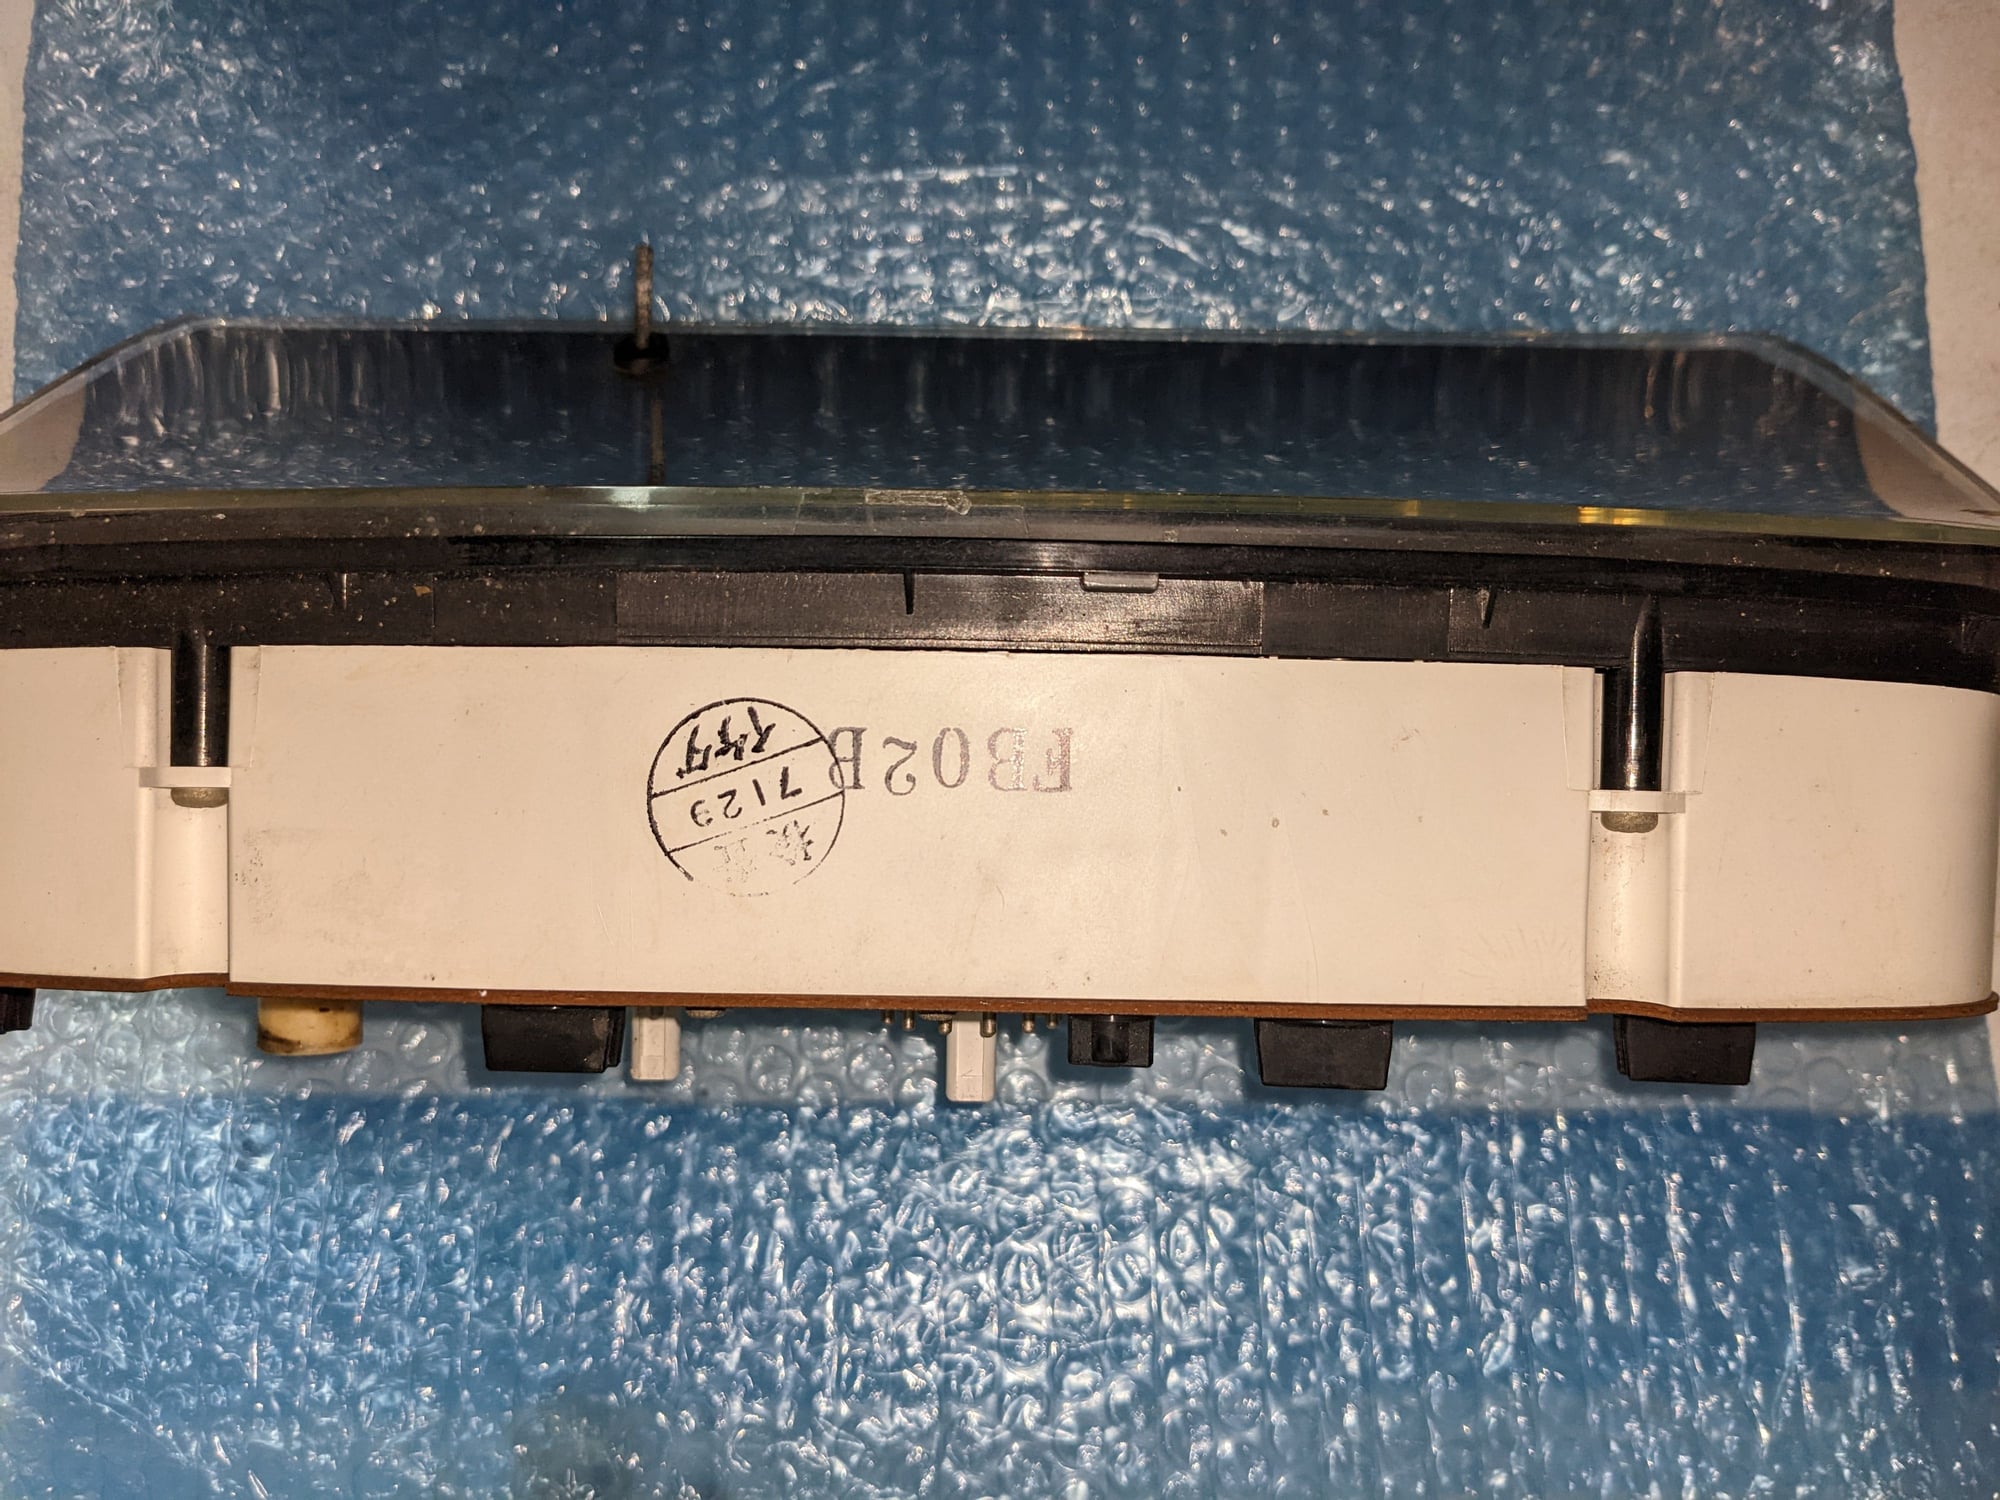 Miscellaneous - 87 FC Instrument Cluster - Used - 1987 to 1991 Mazda RX-7 - Chandler, AZ 85249, United States